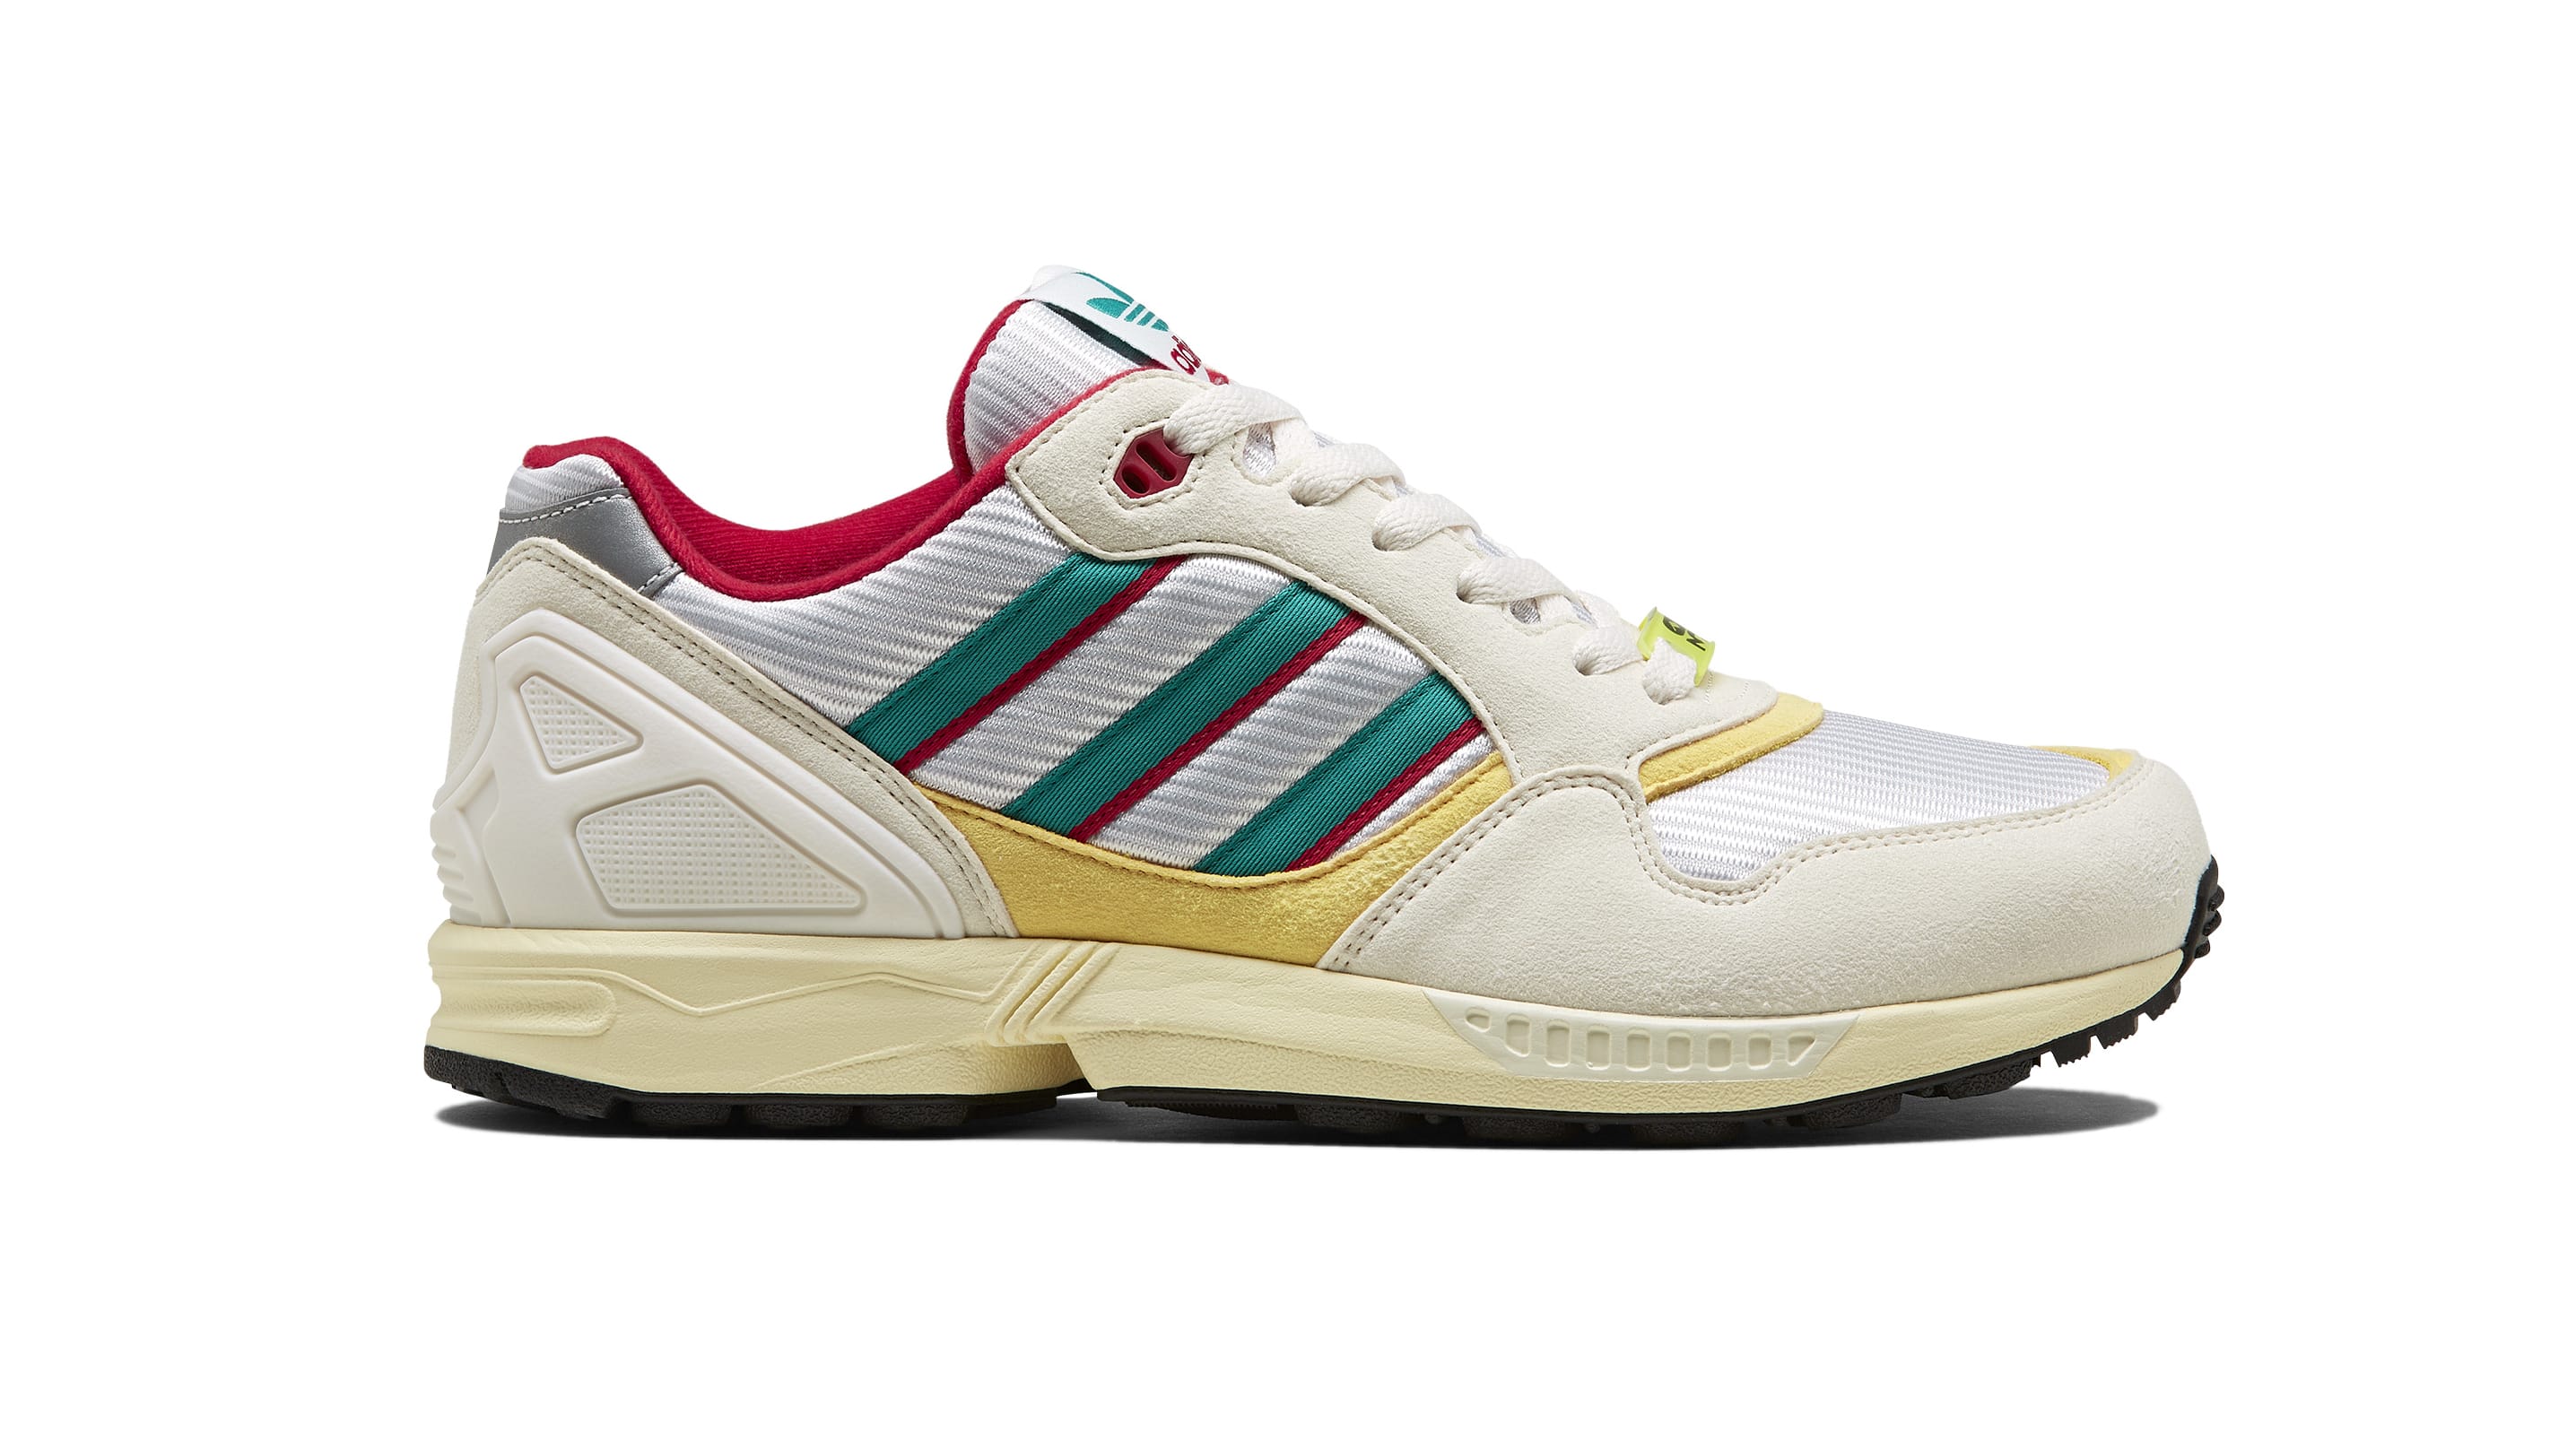 Adidas ZX 5000 ZX 6000 ZX 7000 ZX 9000 '30 Years of Torsion' Collection ...